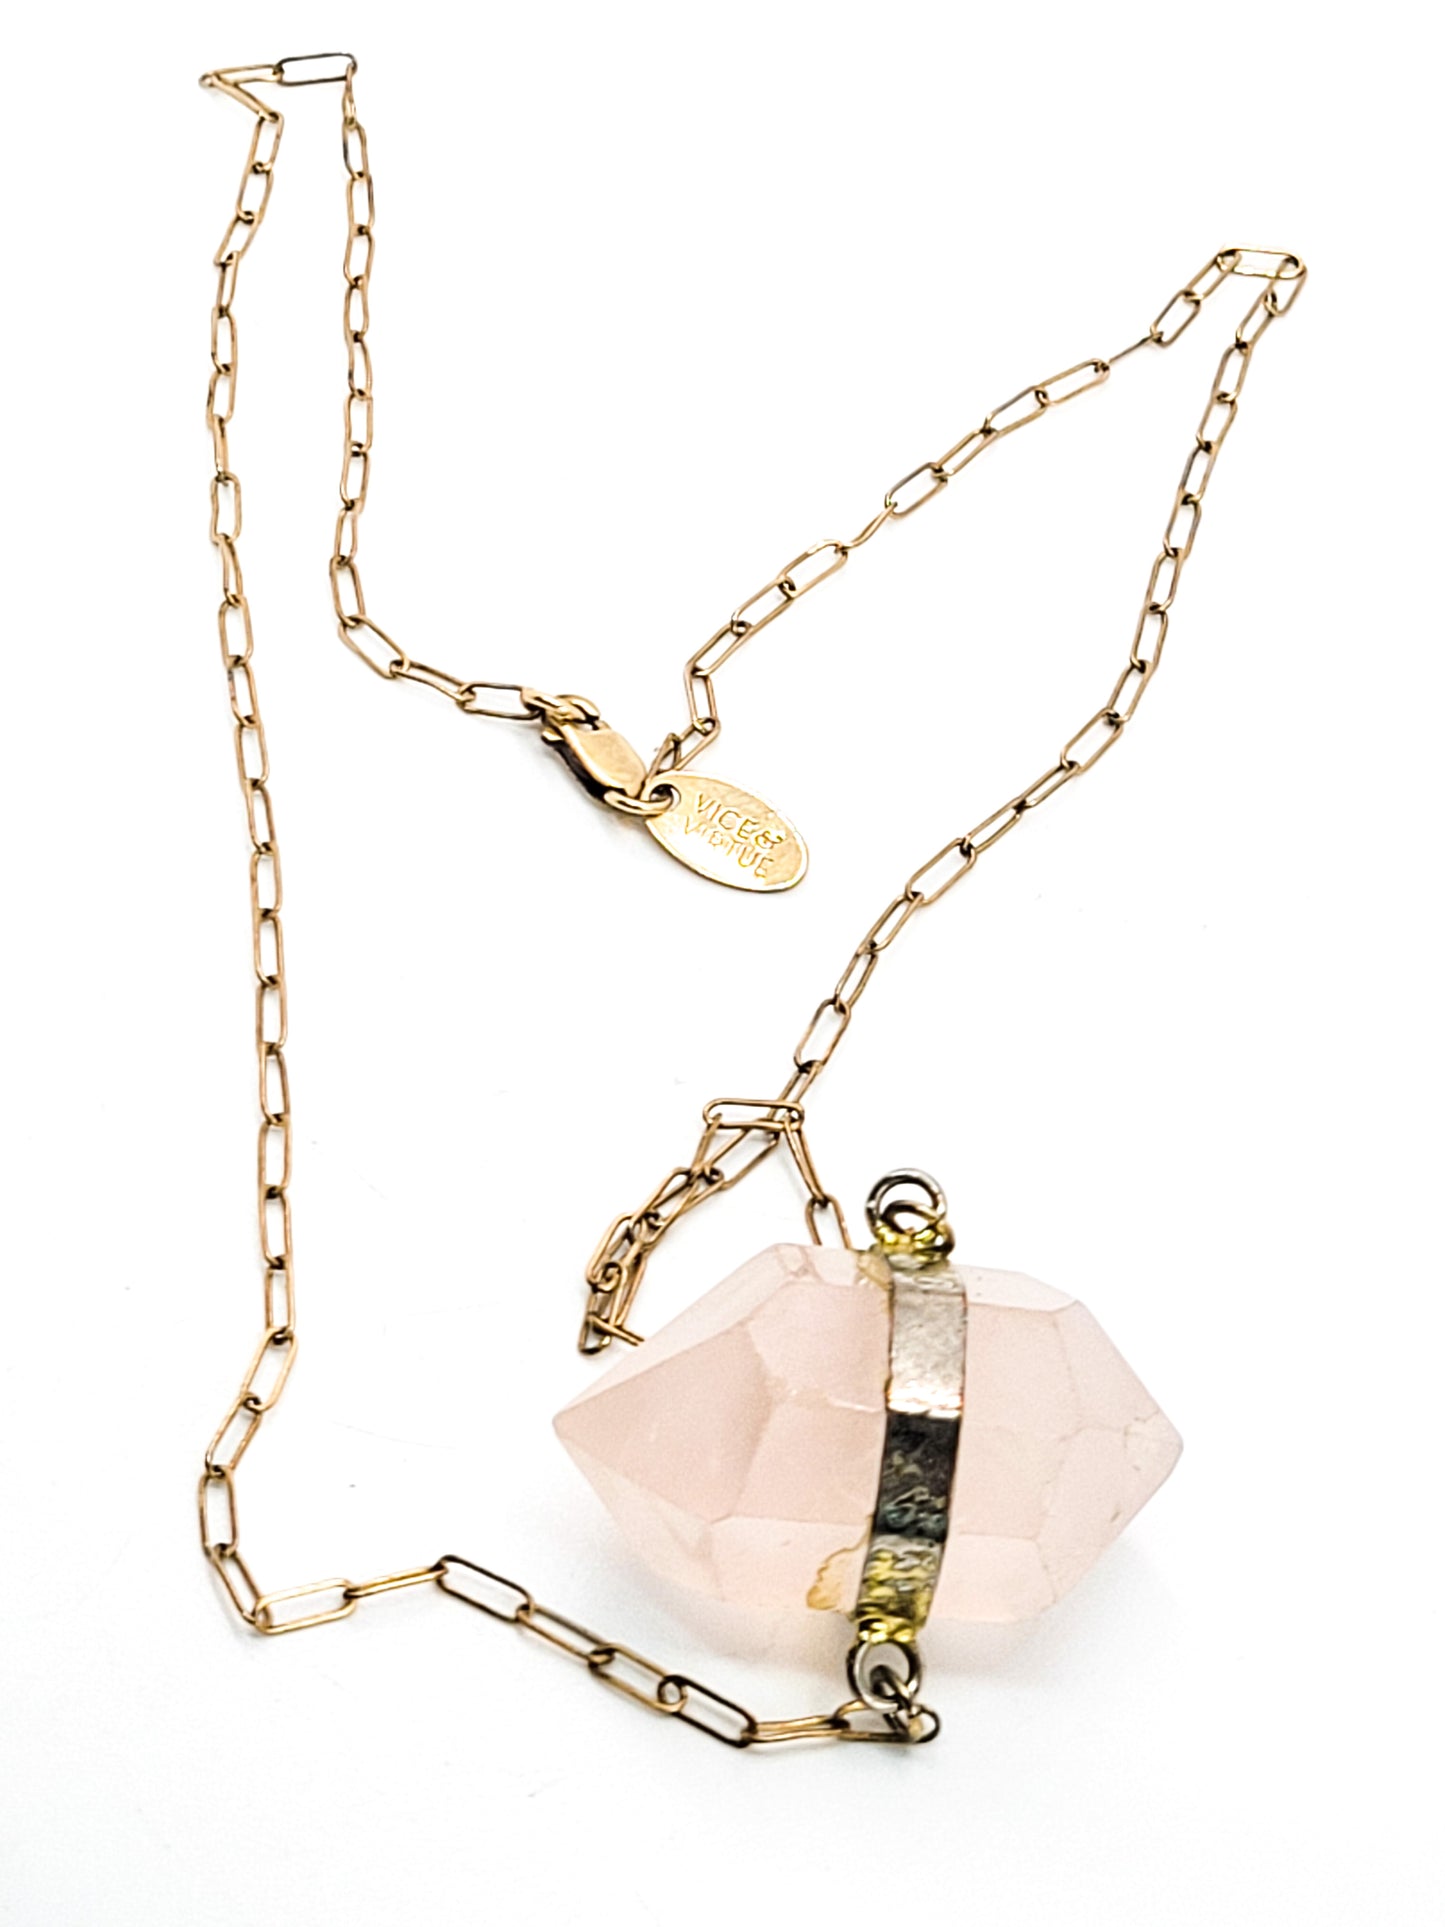 Vice and Virtue 14k gold filled Double terminated Rose Quartz pendant necklace